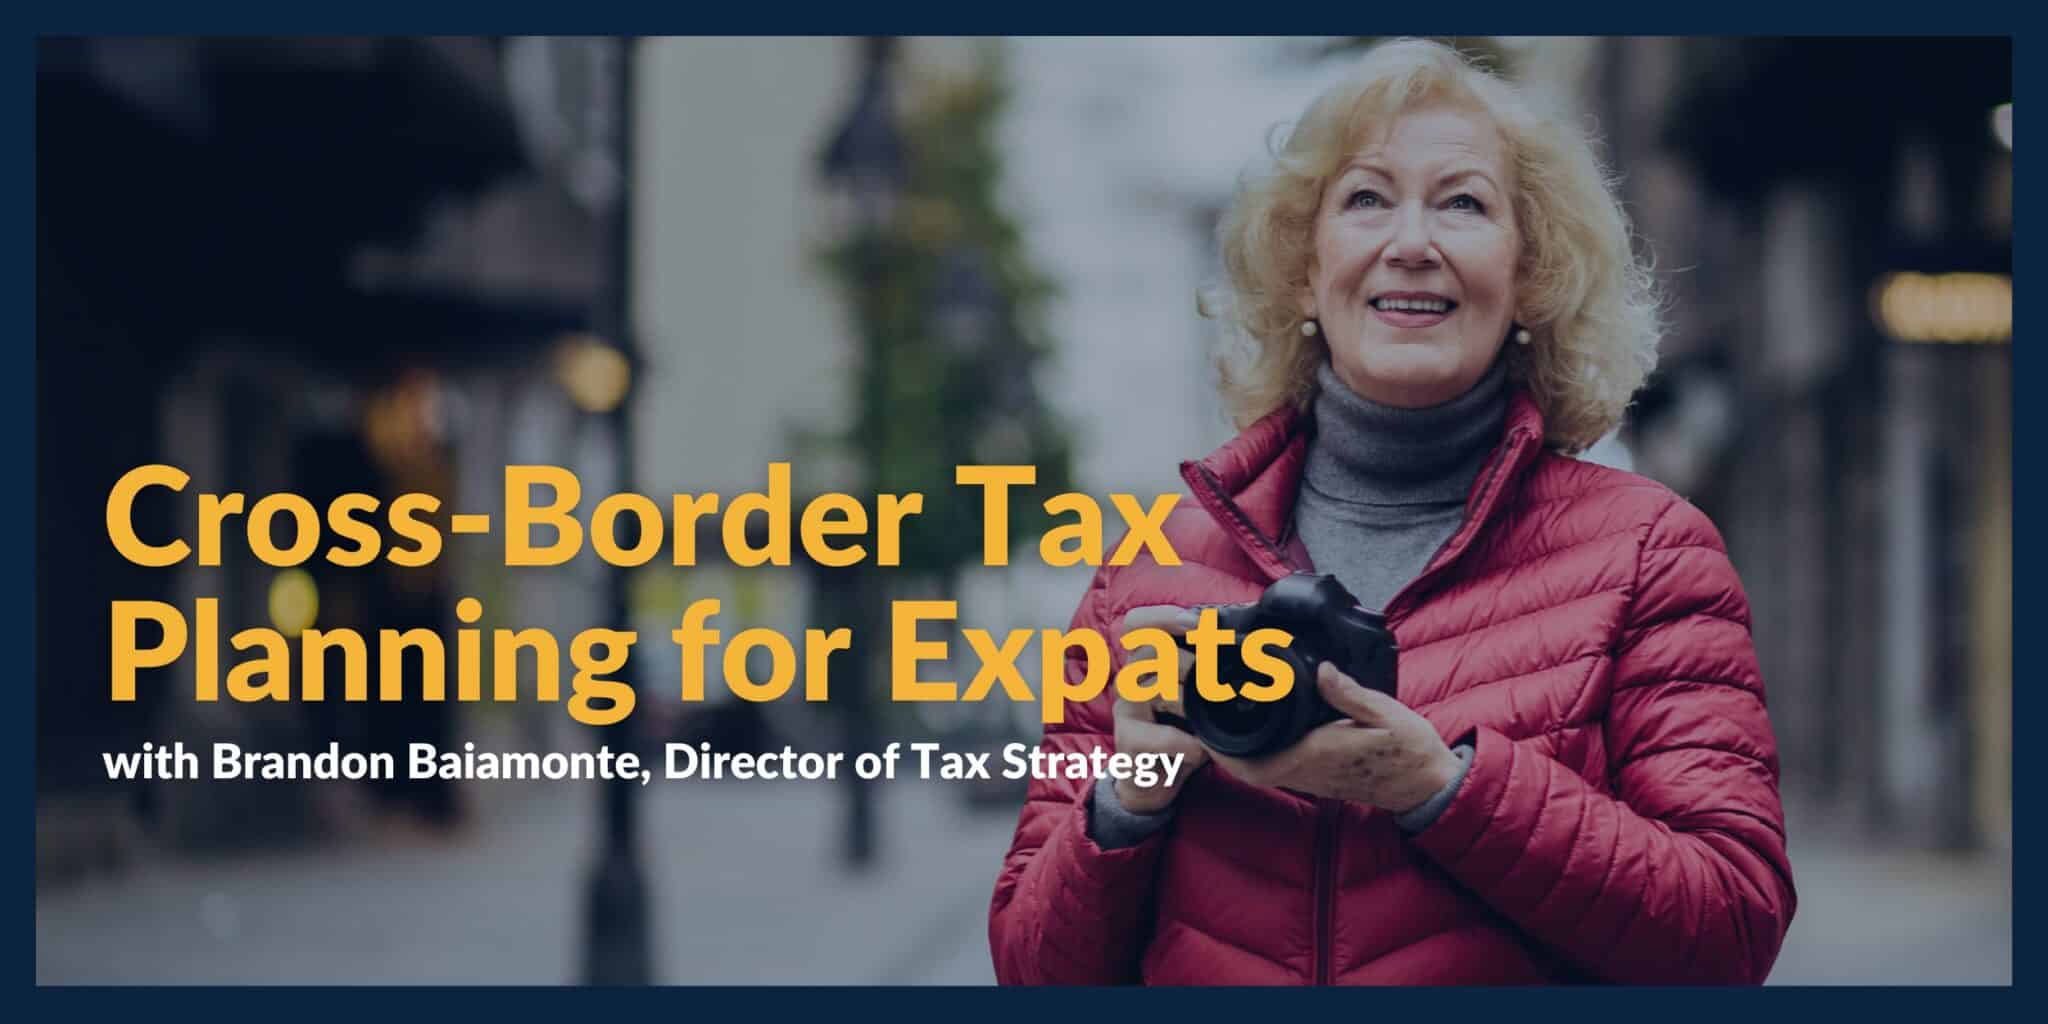 Cross-Border Tax Planning for Expats